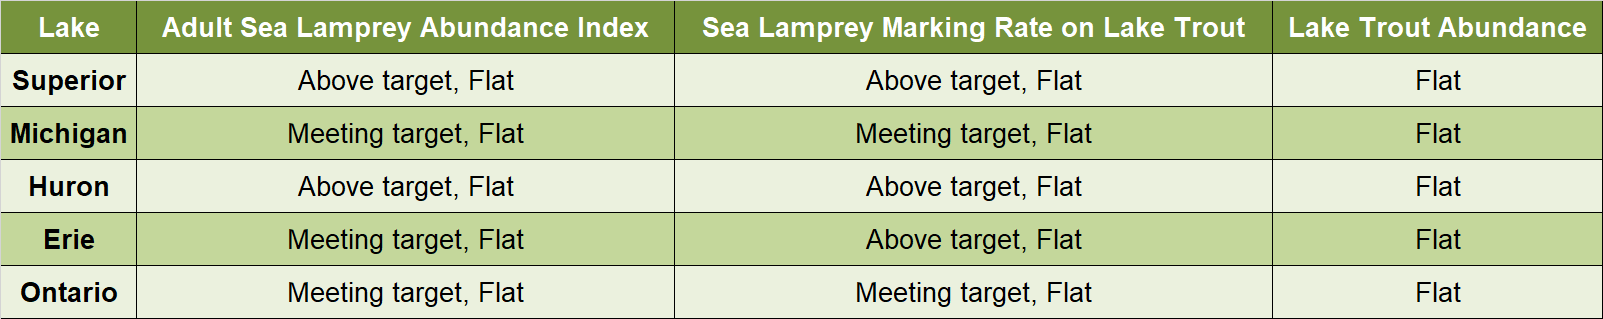 Chart showing sea lamprey abundance, wounds on lake trout and lake trout abundance for each great lake.  In Lake Superior the adult sea lamprey abundance index is above target and holding steady; the sea lamprey marking rate on lake trout is above target and holding steady; and, lake trout abundance is steady.  In Lake Michigan the adult sea lamprey abundance index is meeting target and holding steady; the sea lamprey marking rate on lake trout is above target and decreasing; and, lake trout abundance is steady.  In Lake Huron the adult sea lamprey abundance index is above target and holding steady; the sea lamprey marking rate on lake trout is above target and holding steady; and, lake trout abundance is steady.  In Lake Erie the adult sea lamprey abundance index is above target and holding steady; the sea lamprey marking rate on lake trout is above target and holding steady; and, lake trout abundance is steady.  In Lake Ontario the adult sea lamprey abundance index is meeting target and holding steady; the sea lamprey marking rate on lake trout is meeting target and decreasing; and, lake trout abundance is steady.